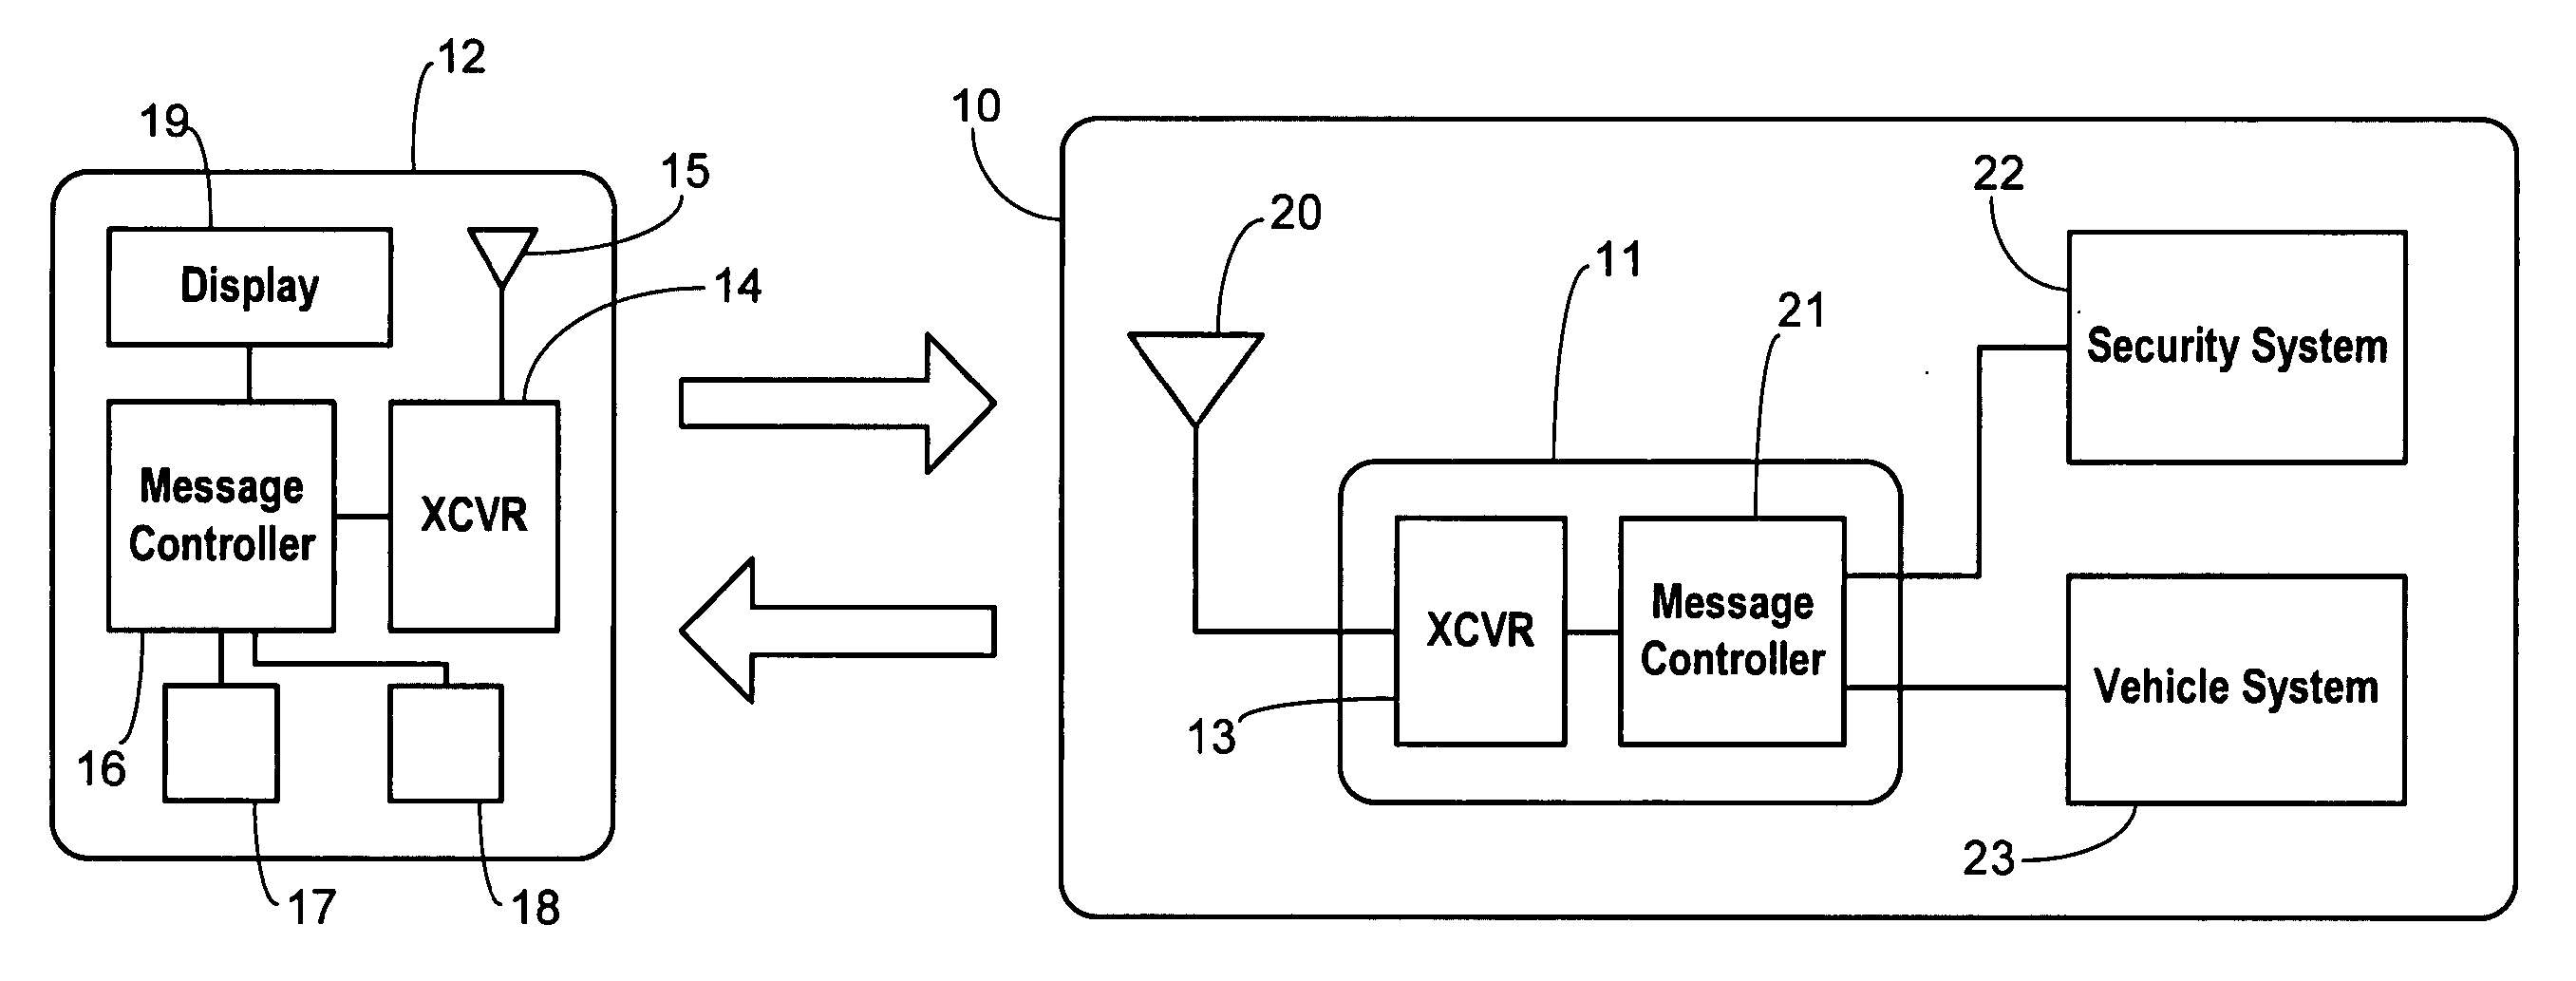 Remote keyless entry system with two-way long range communication